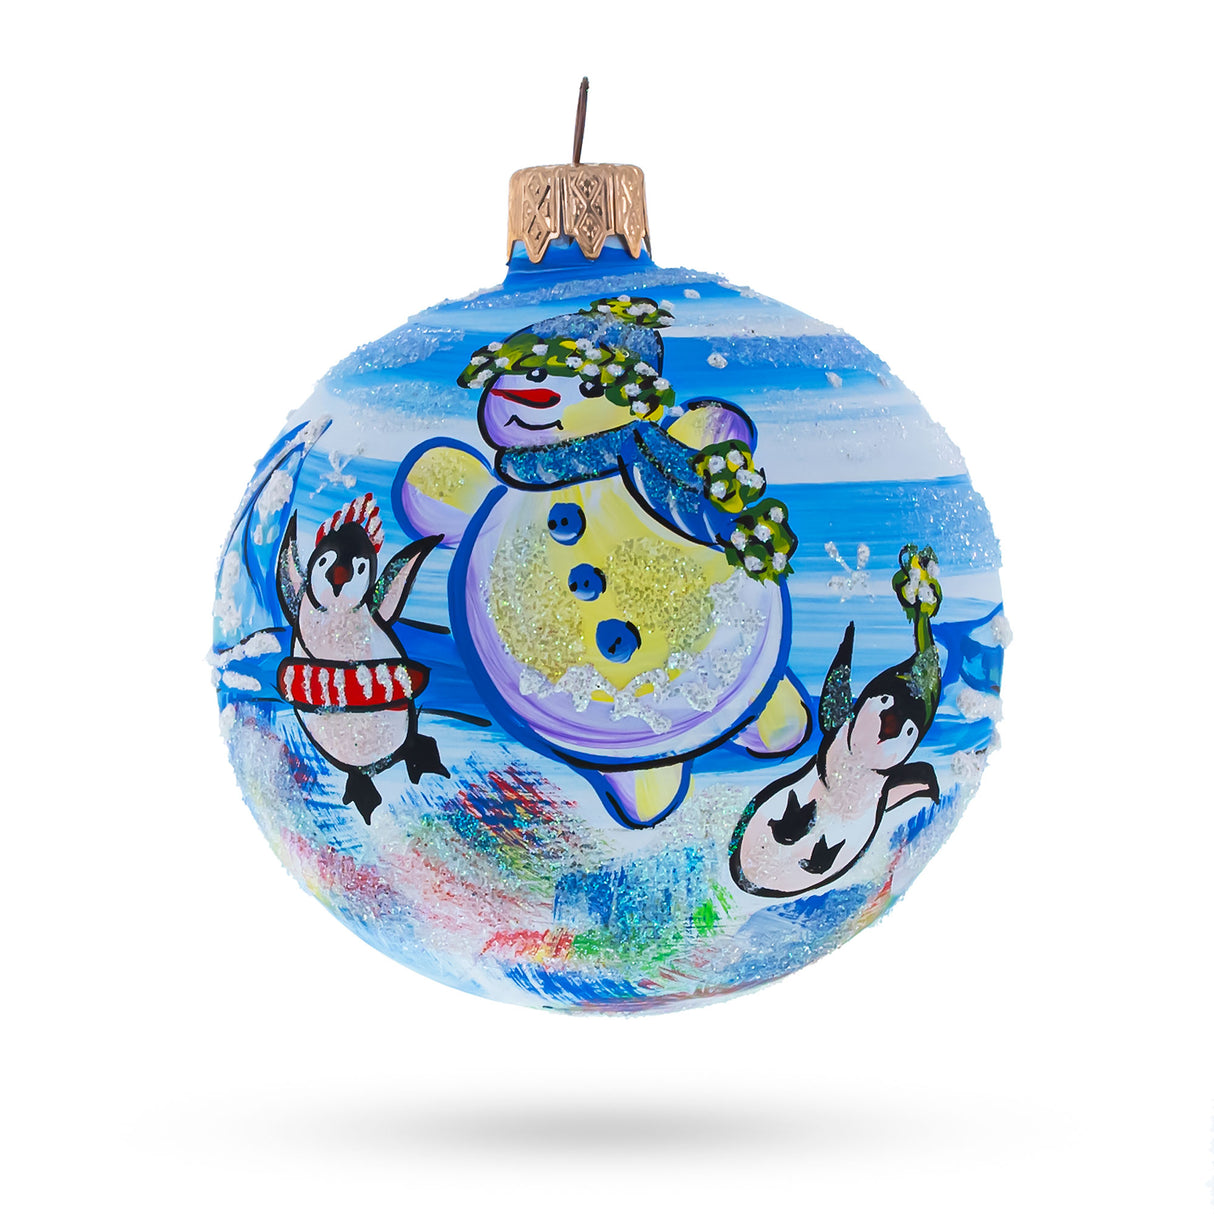 Glass Delightful Snowman with Penguin: Artisan Blown Glass Ball Christmas Ornament 3.25 Inches in Blue color Round